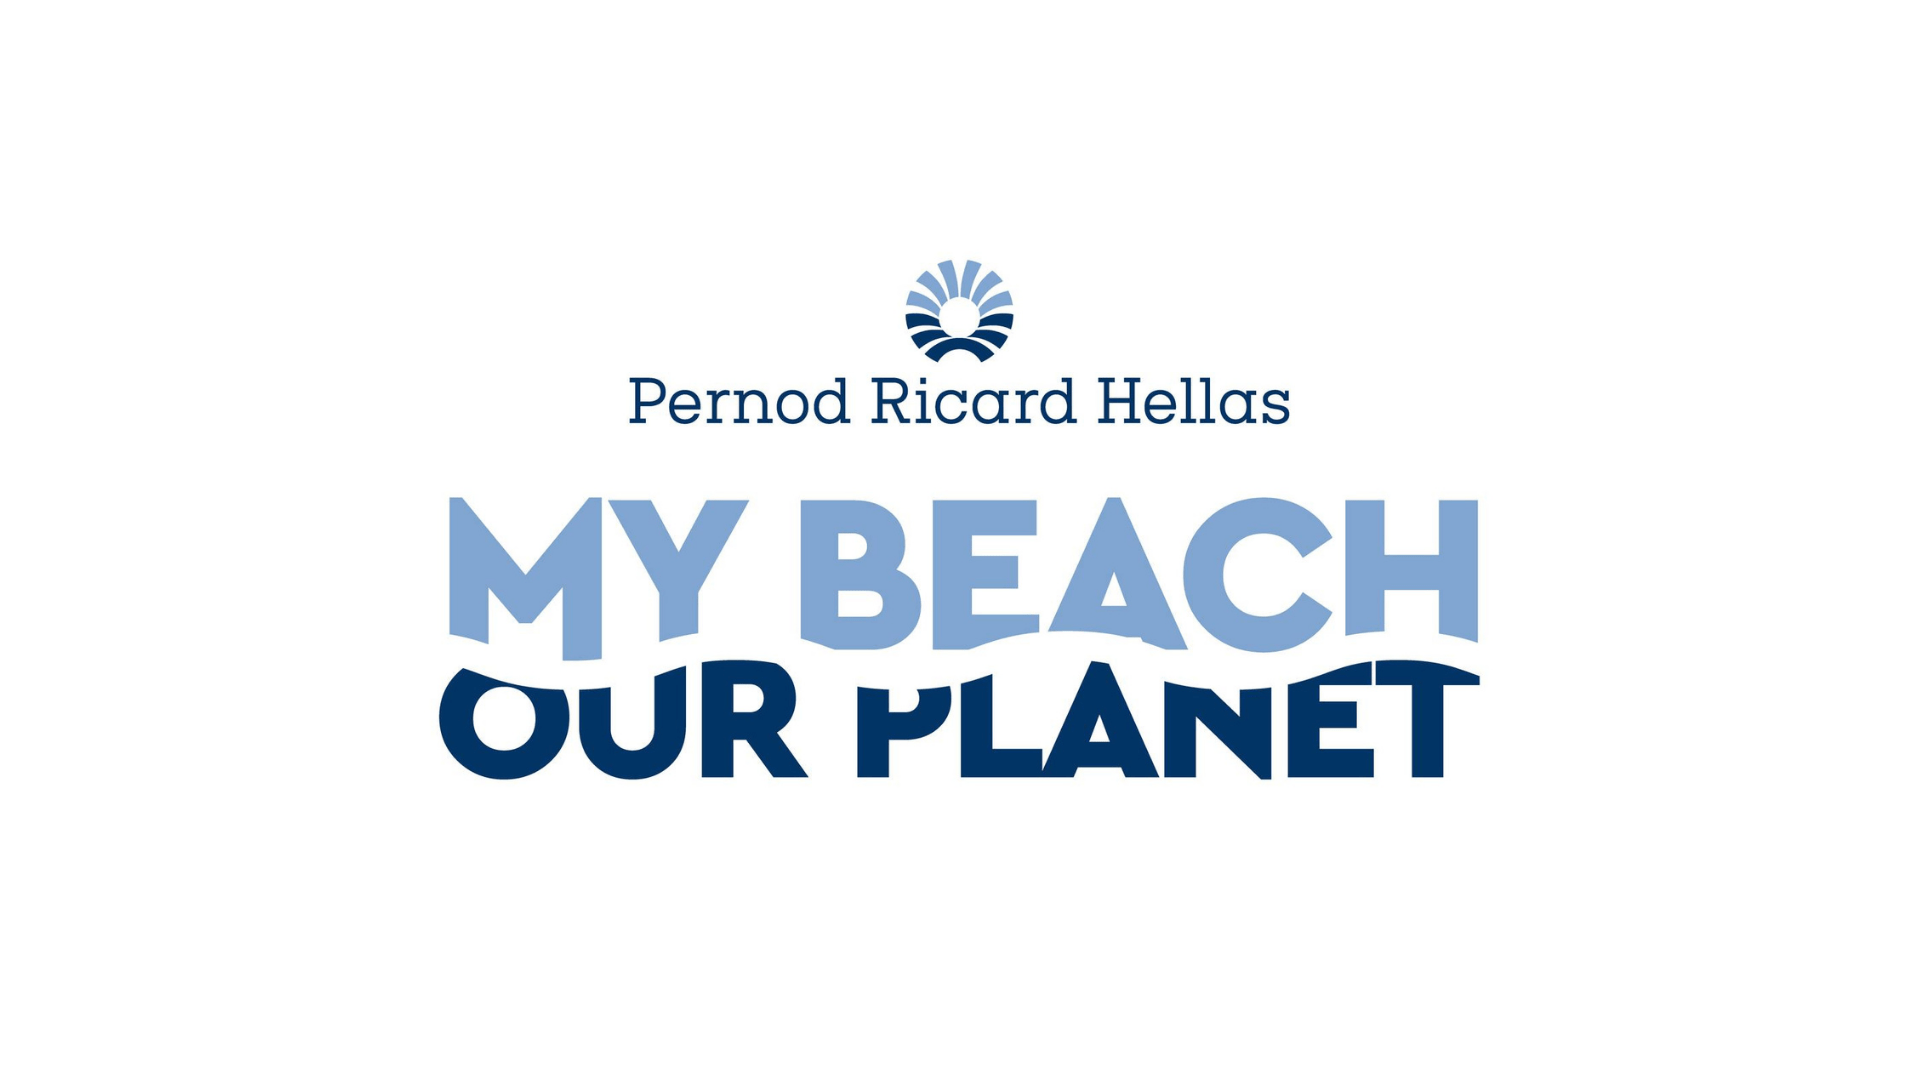 My beach. Our planet